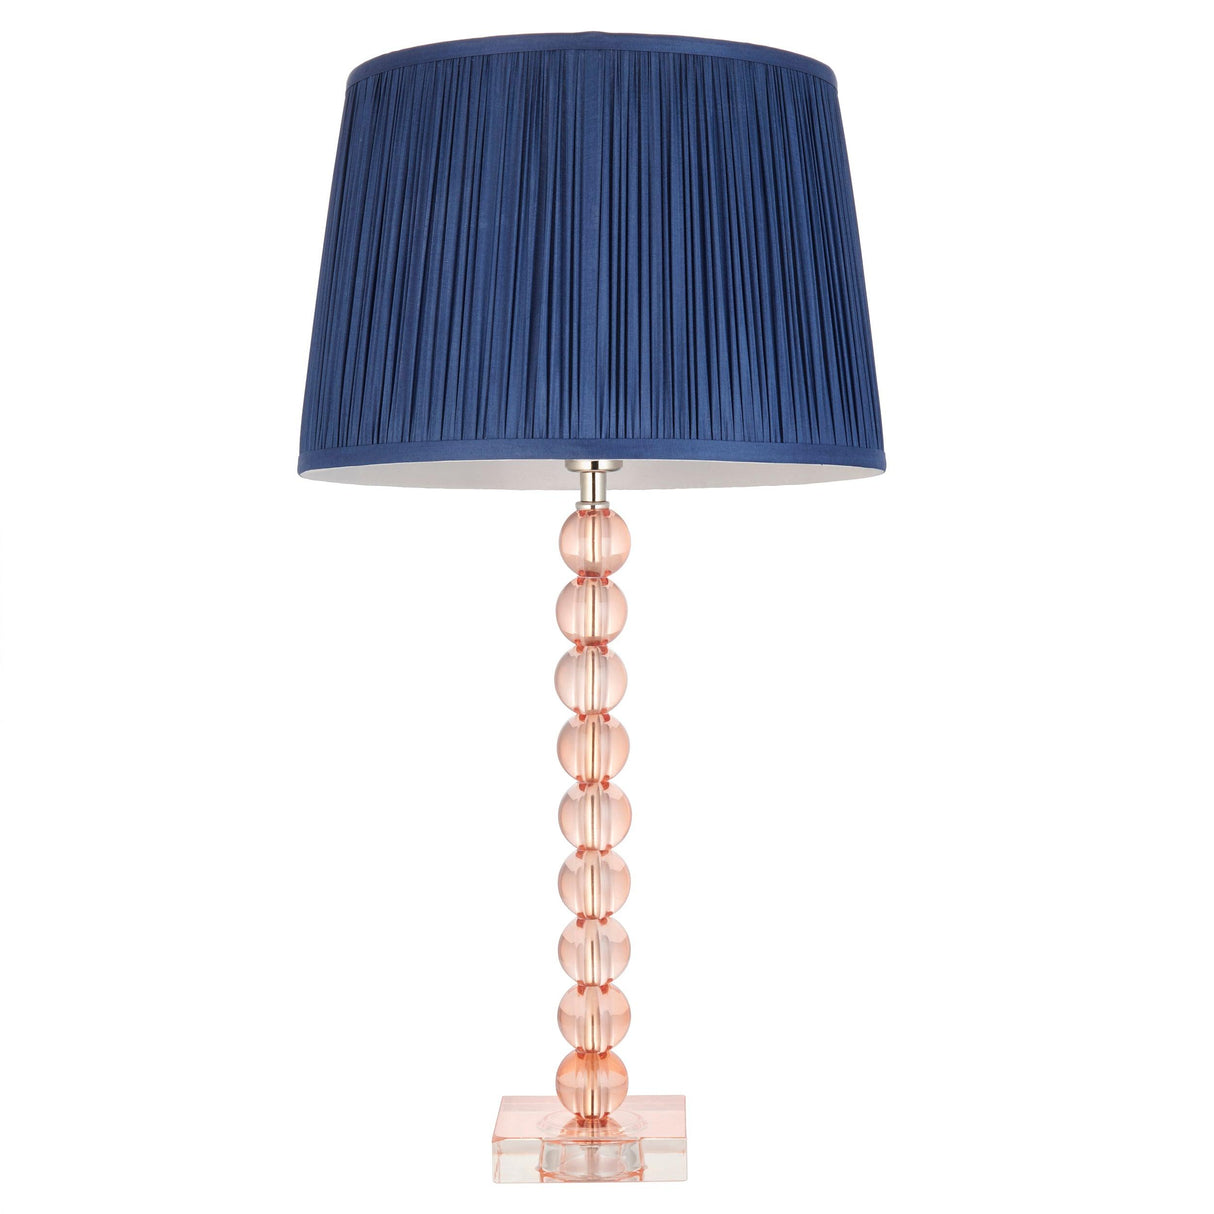 Endon Lighting 100363 - Endon Lighting 100363 Adelie & Wentworth Indoor Table Lamps Blush crystal glass & midnight blue silk Non-dimmable